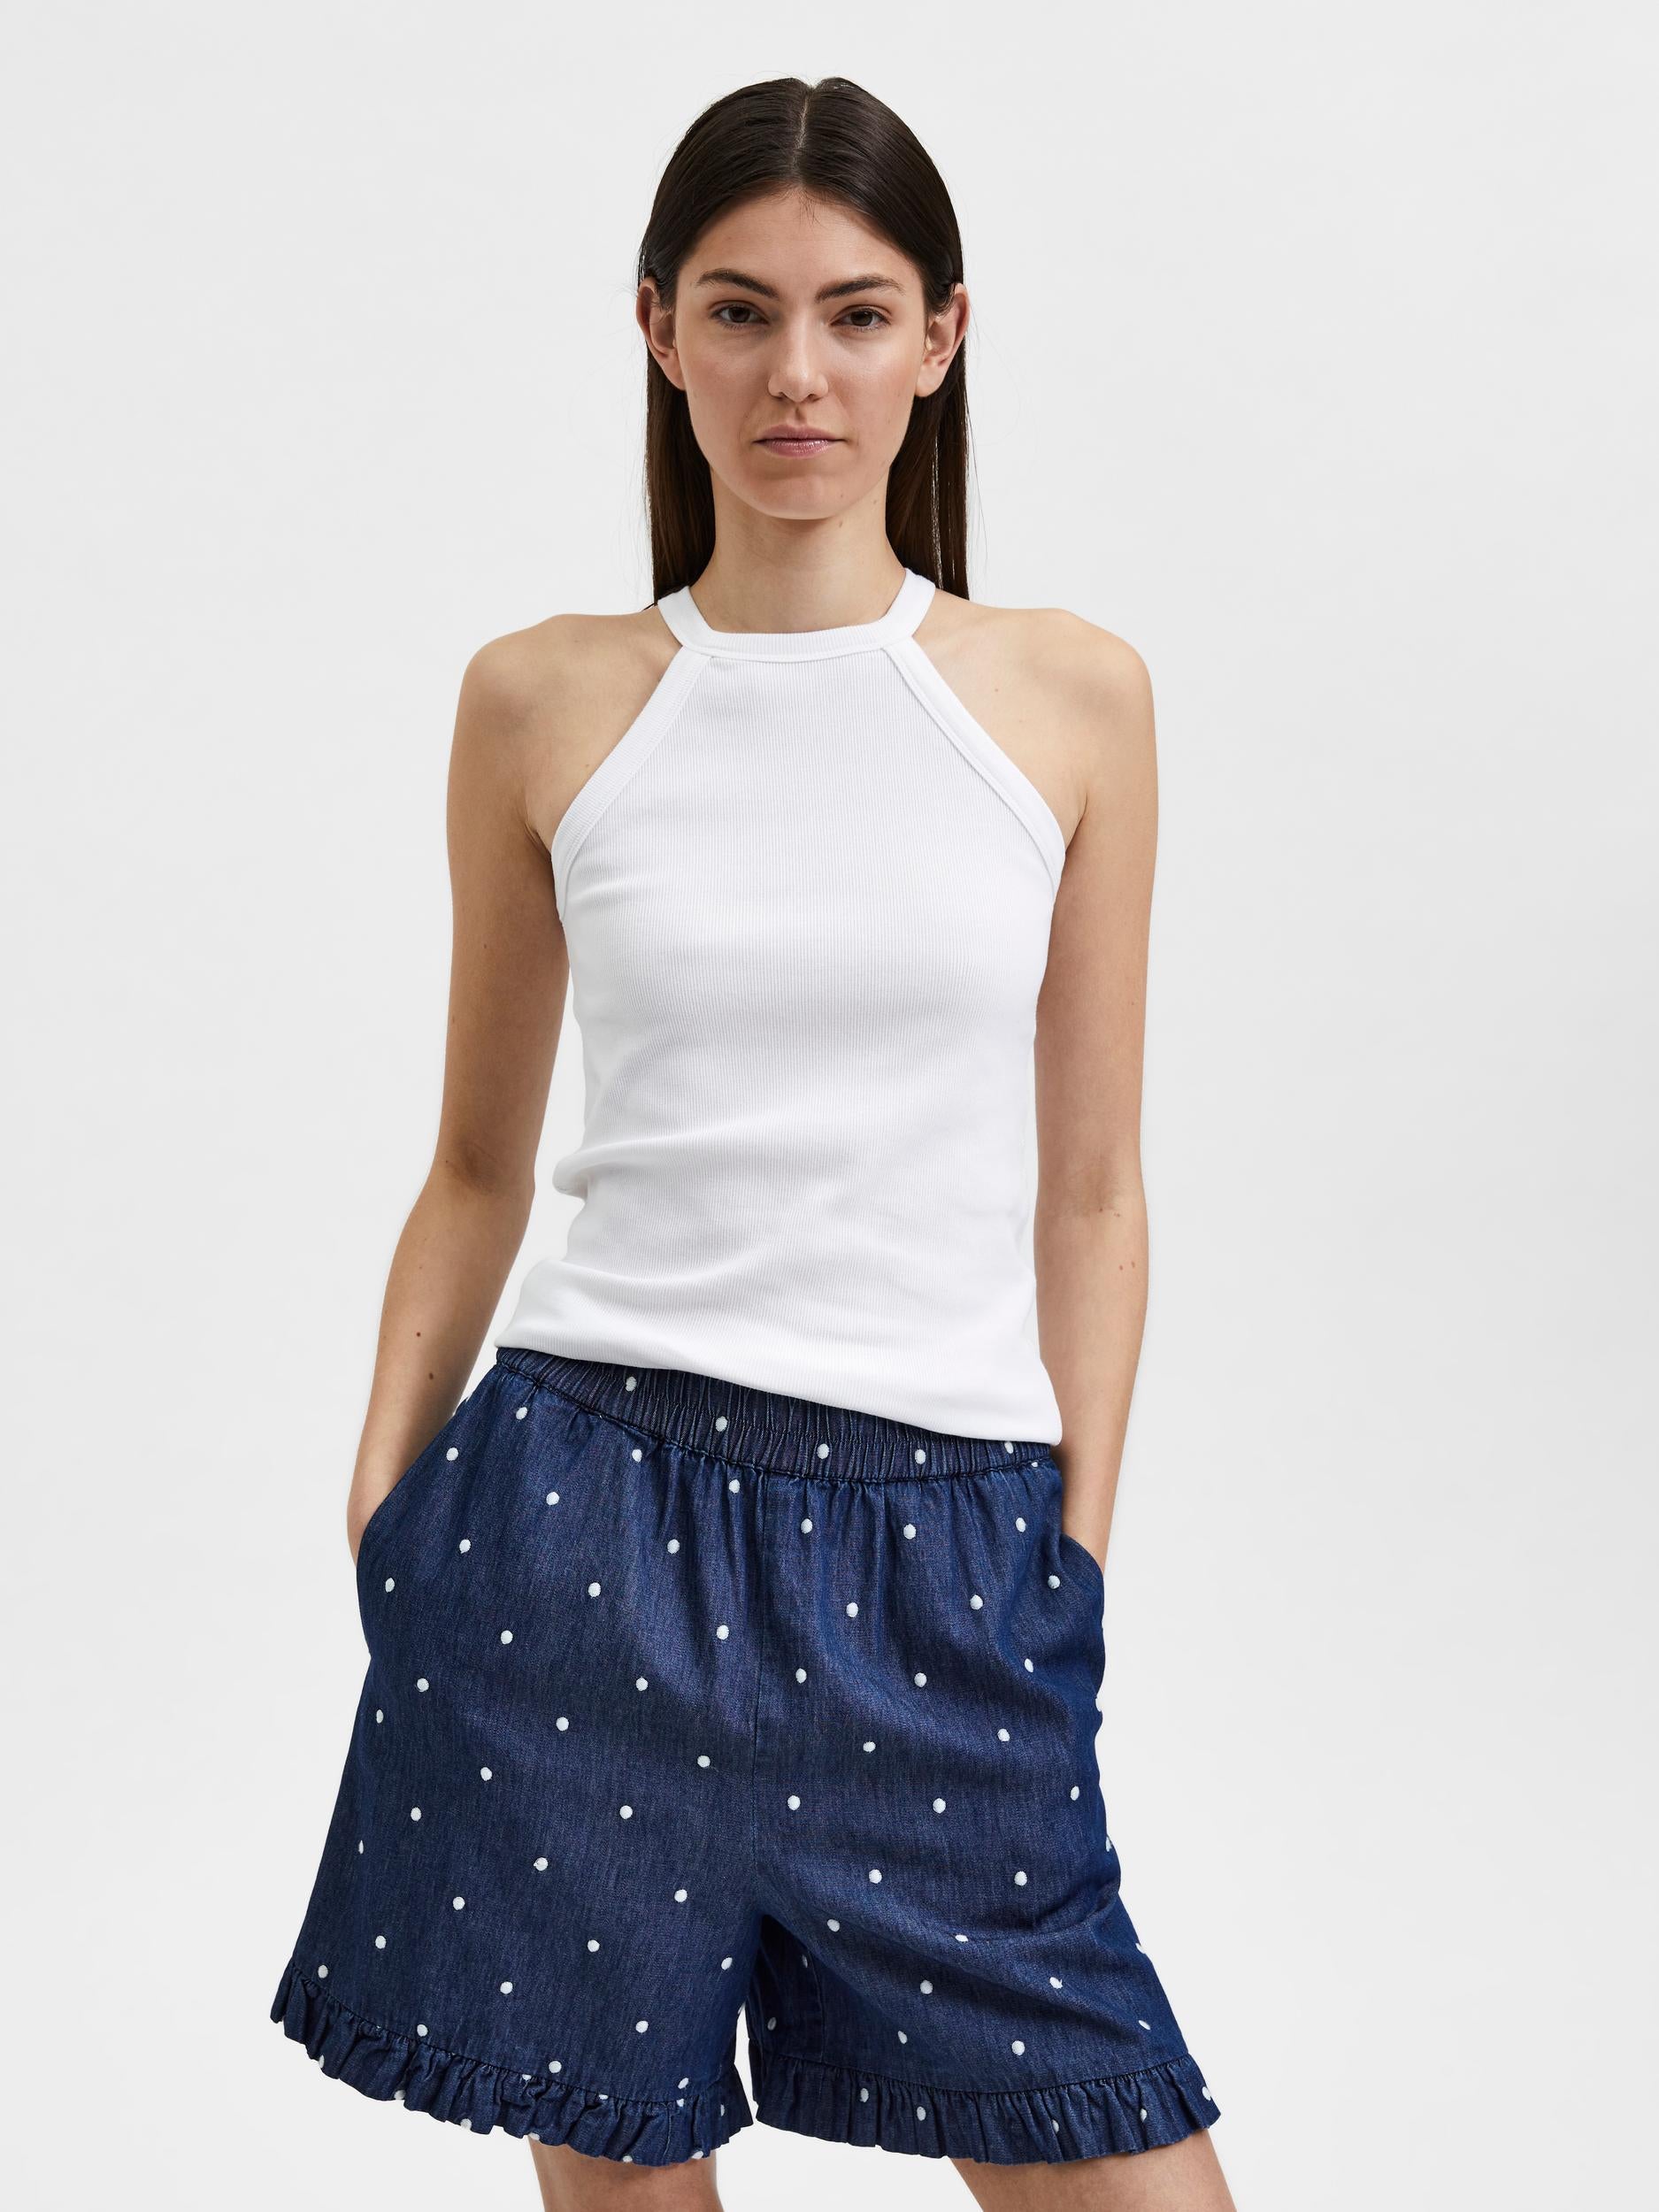 Selected Femme "Analipa" Top weiss